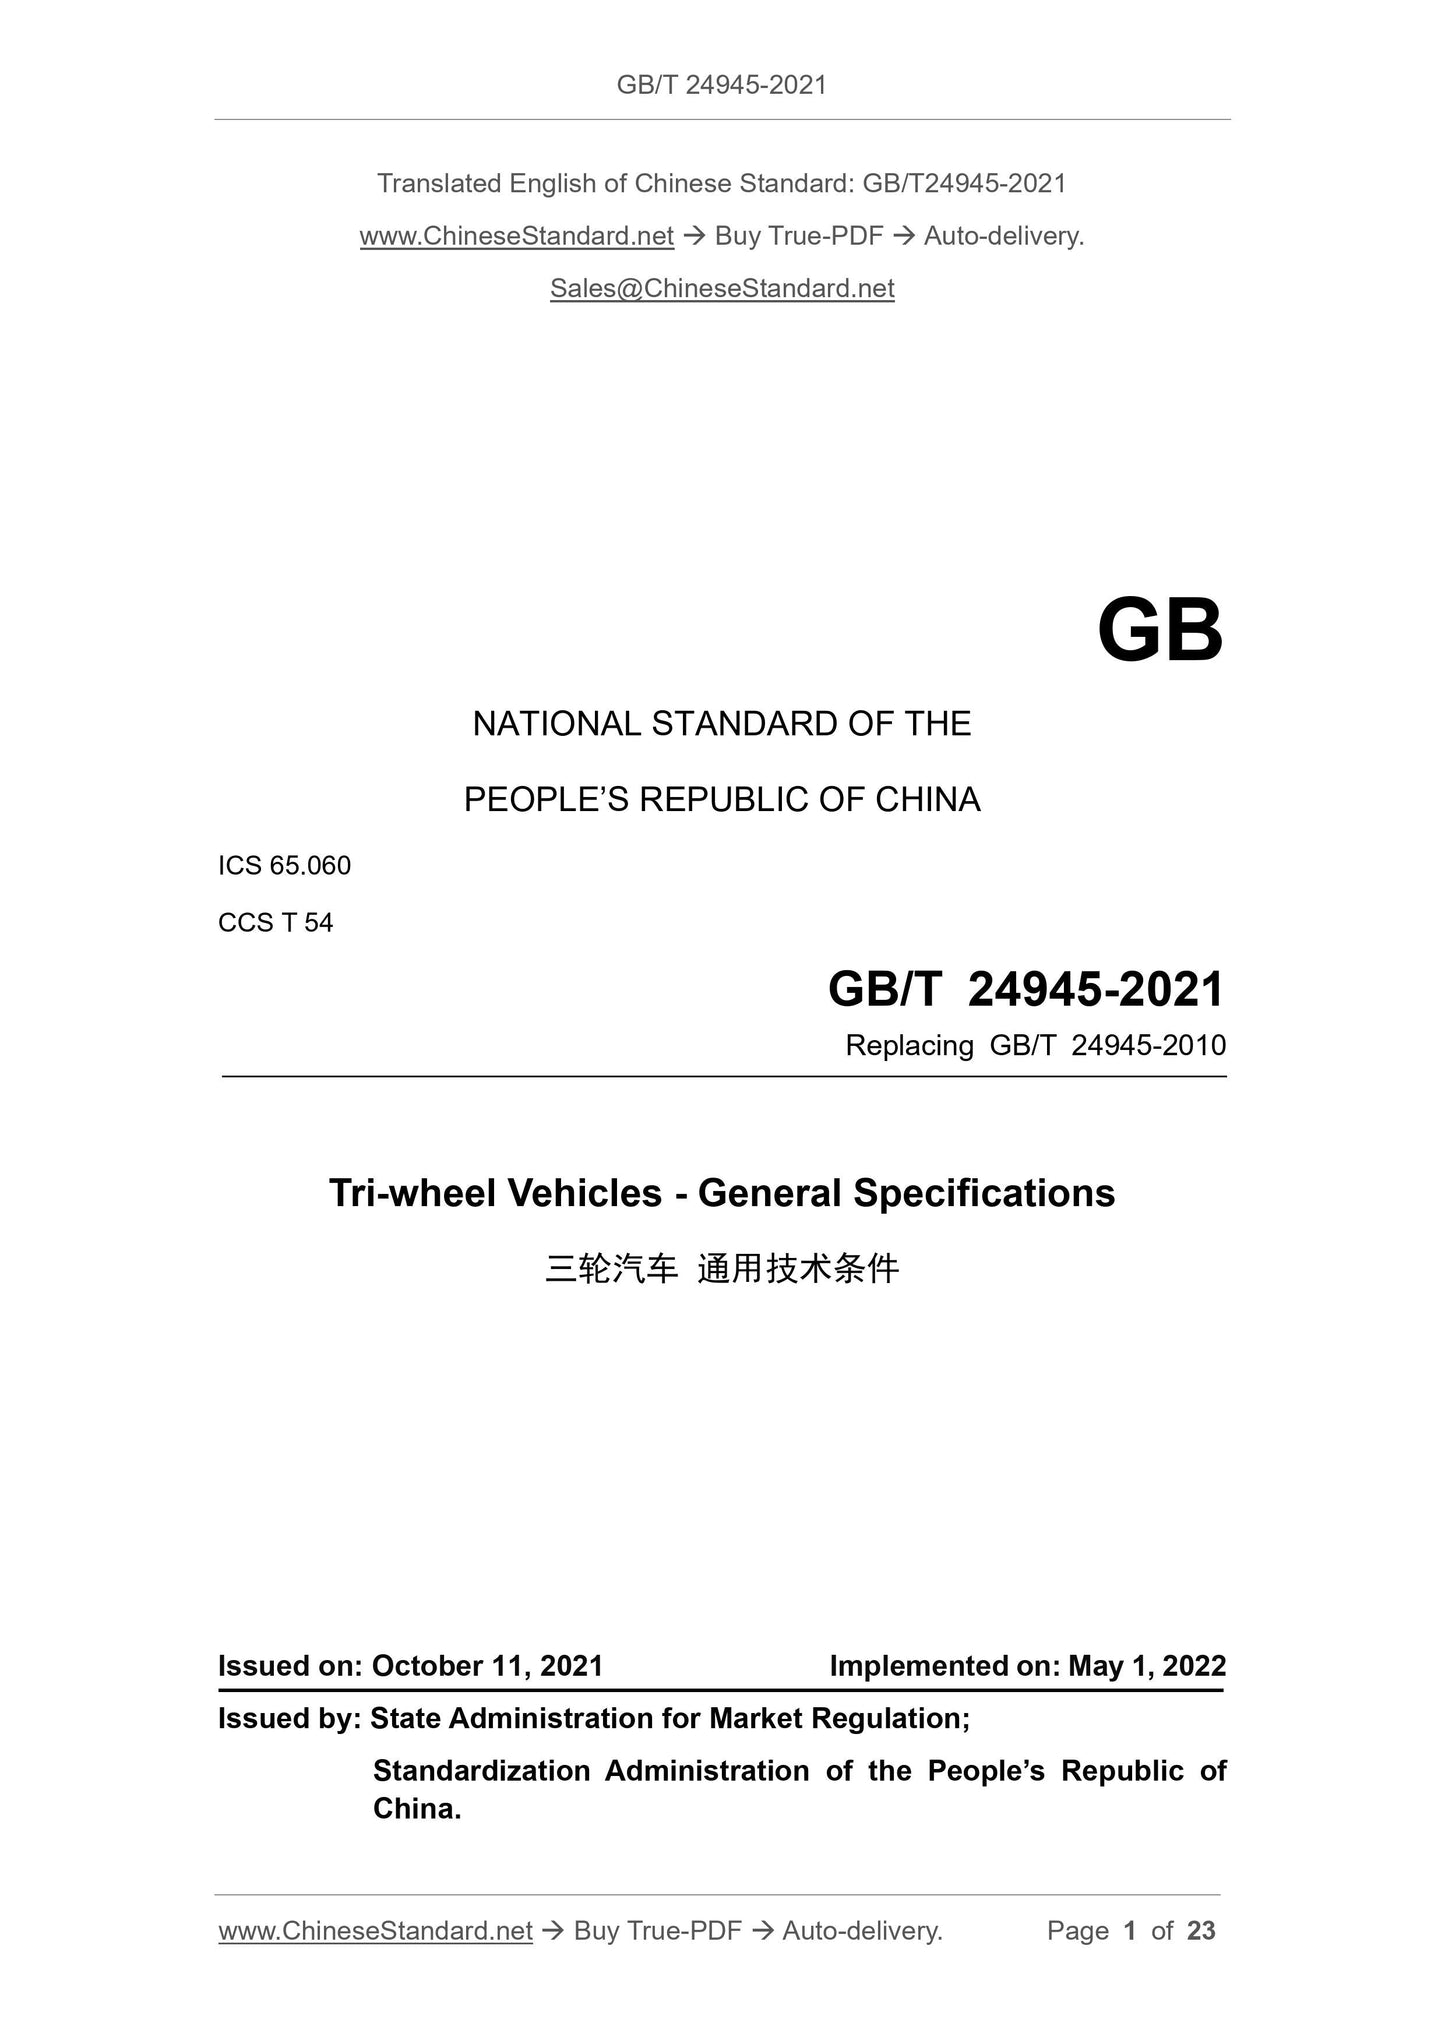 GB/T 24945-2021 Page 1